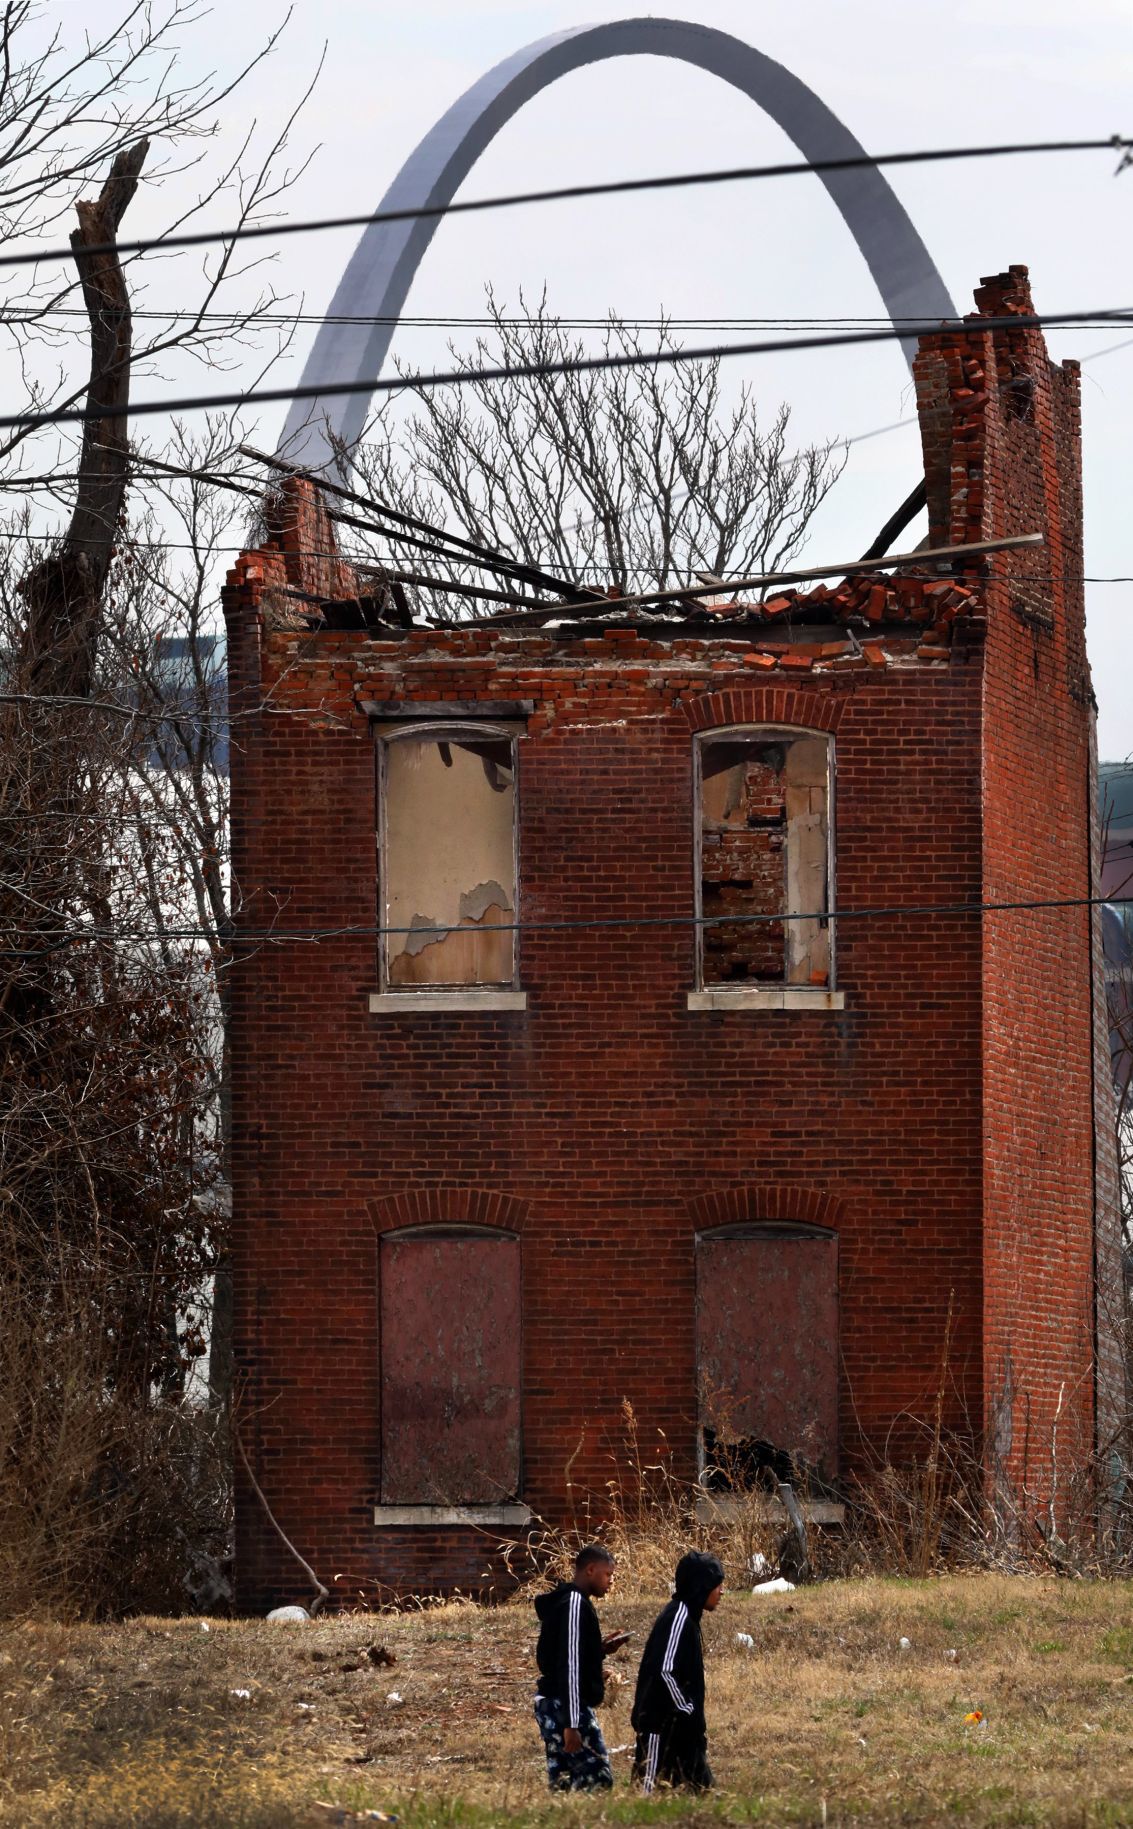 Can a spy agency fight urban blight in St. Louis? - Marketplace